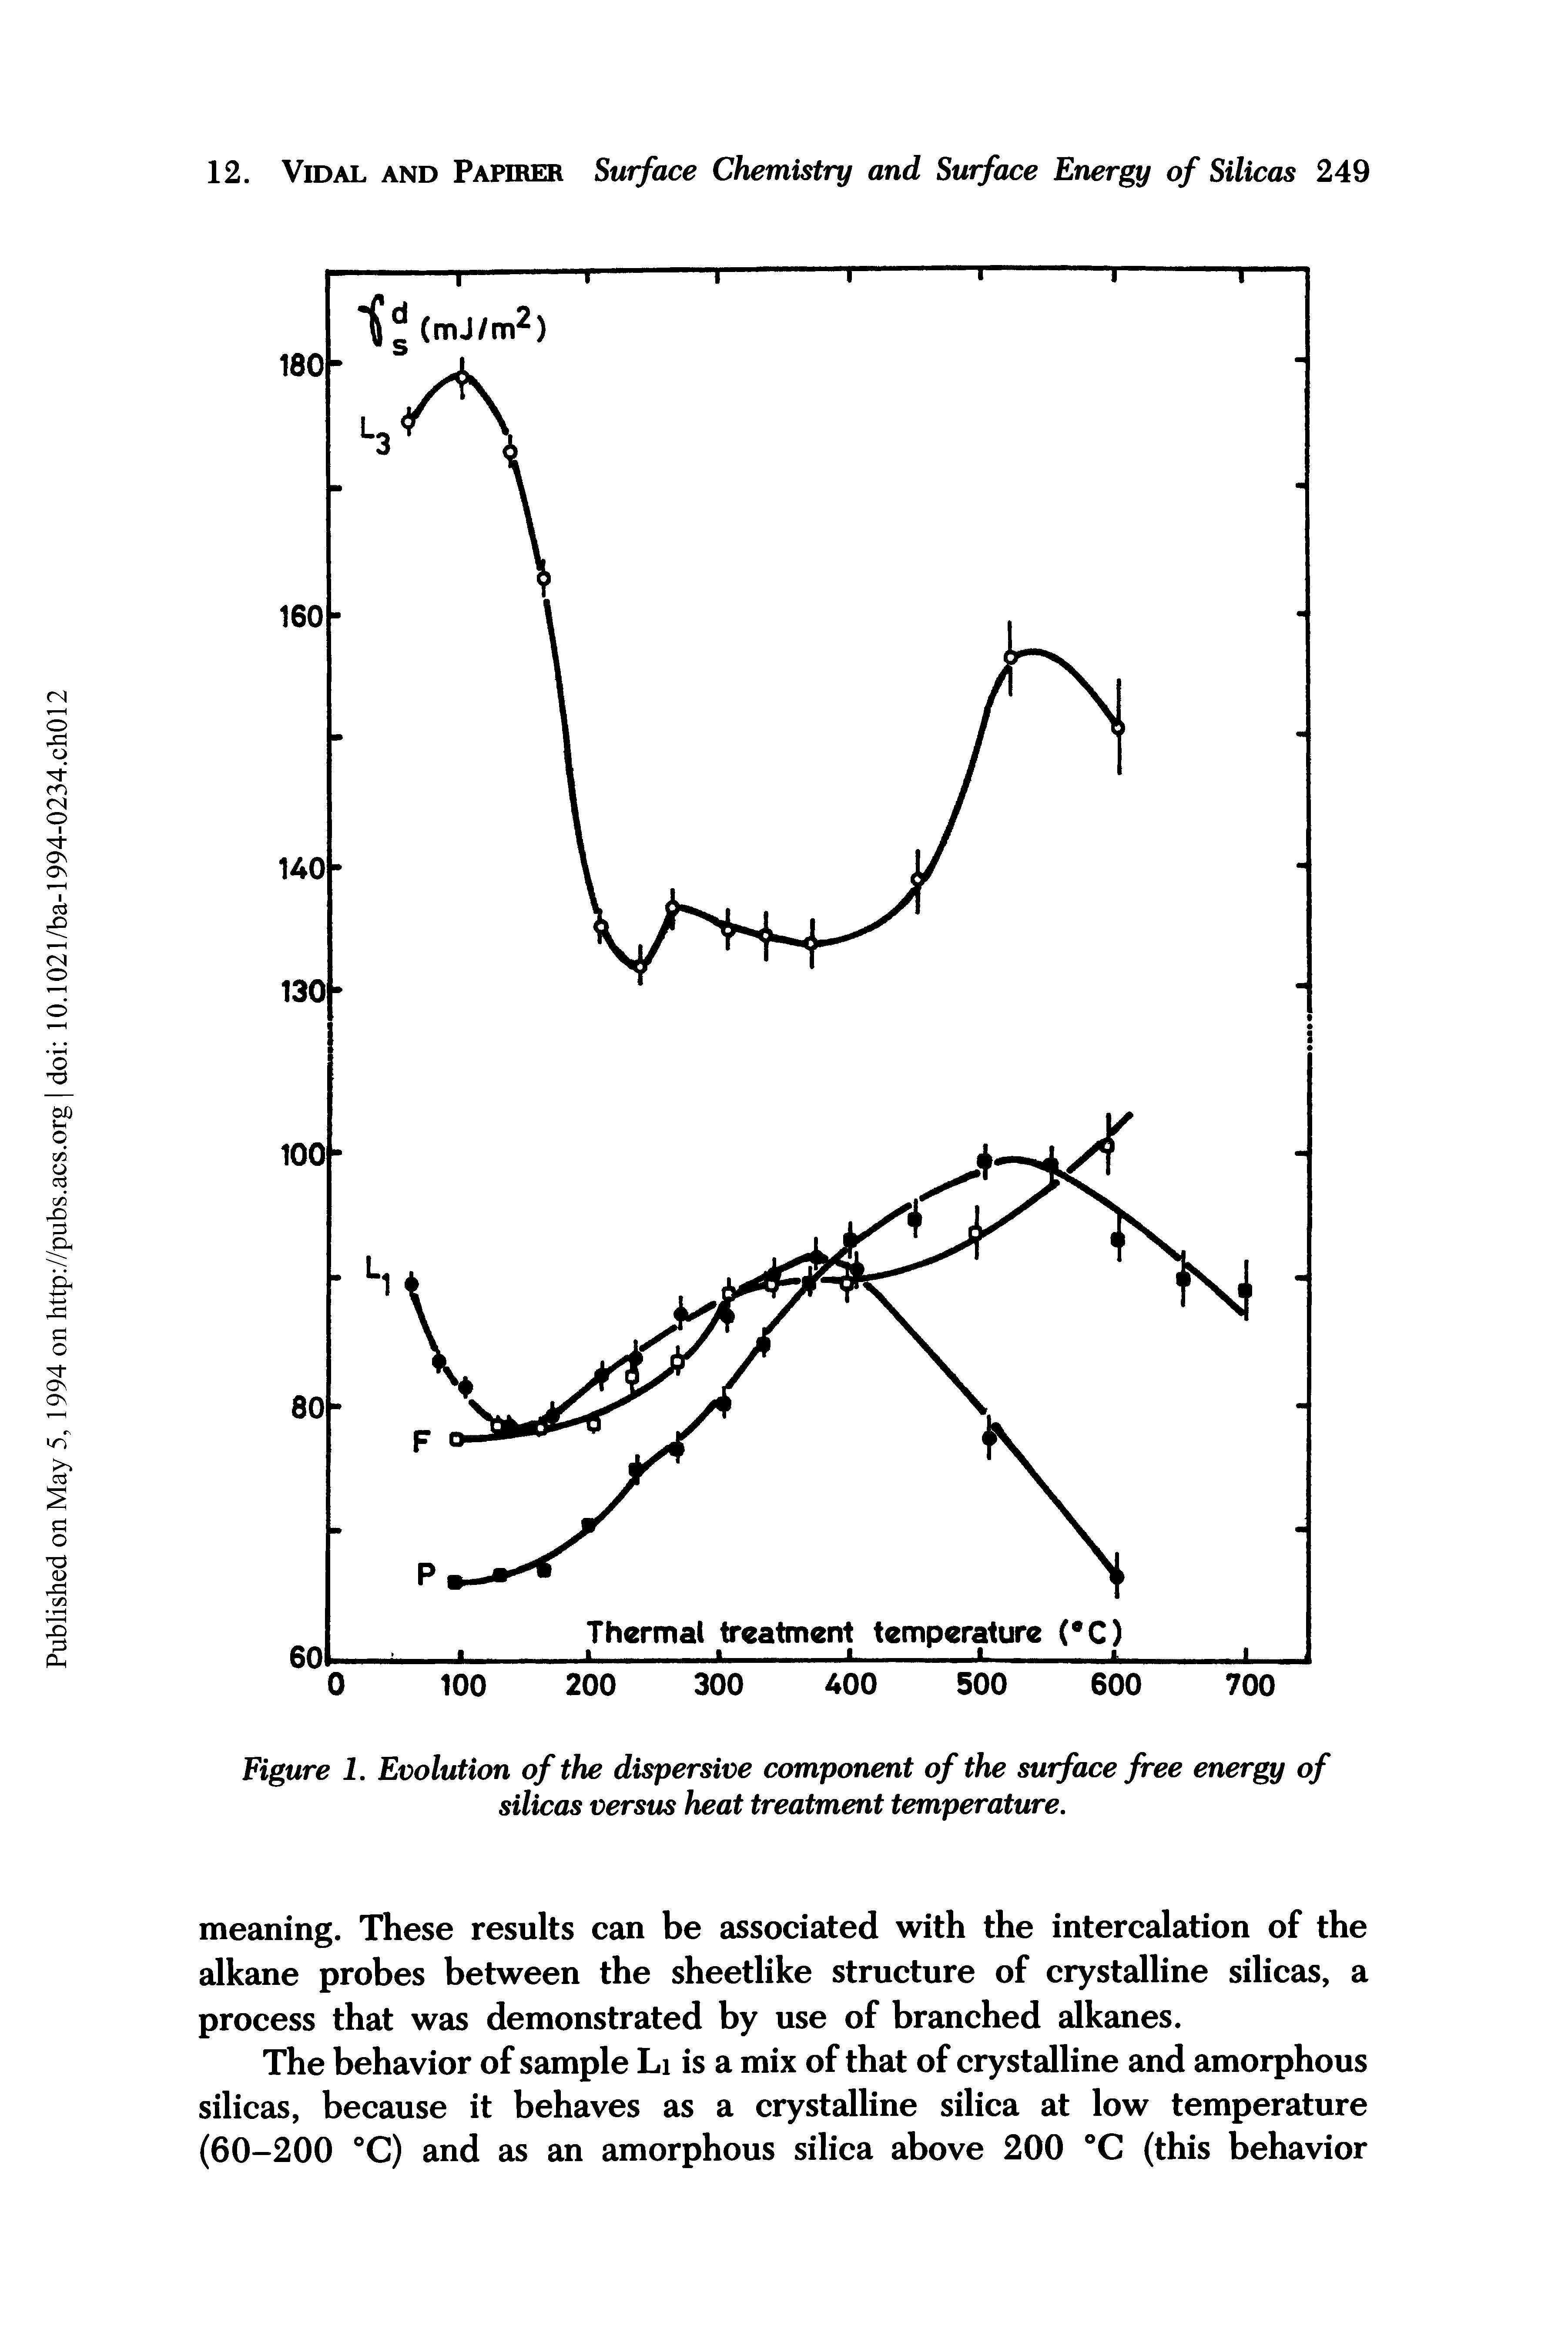 Figure 1. Evolution of the dispersive component of the surface free energy of silicas versus heat treatment temperature.